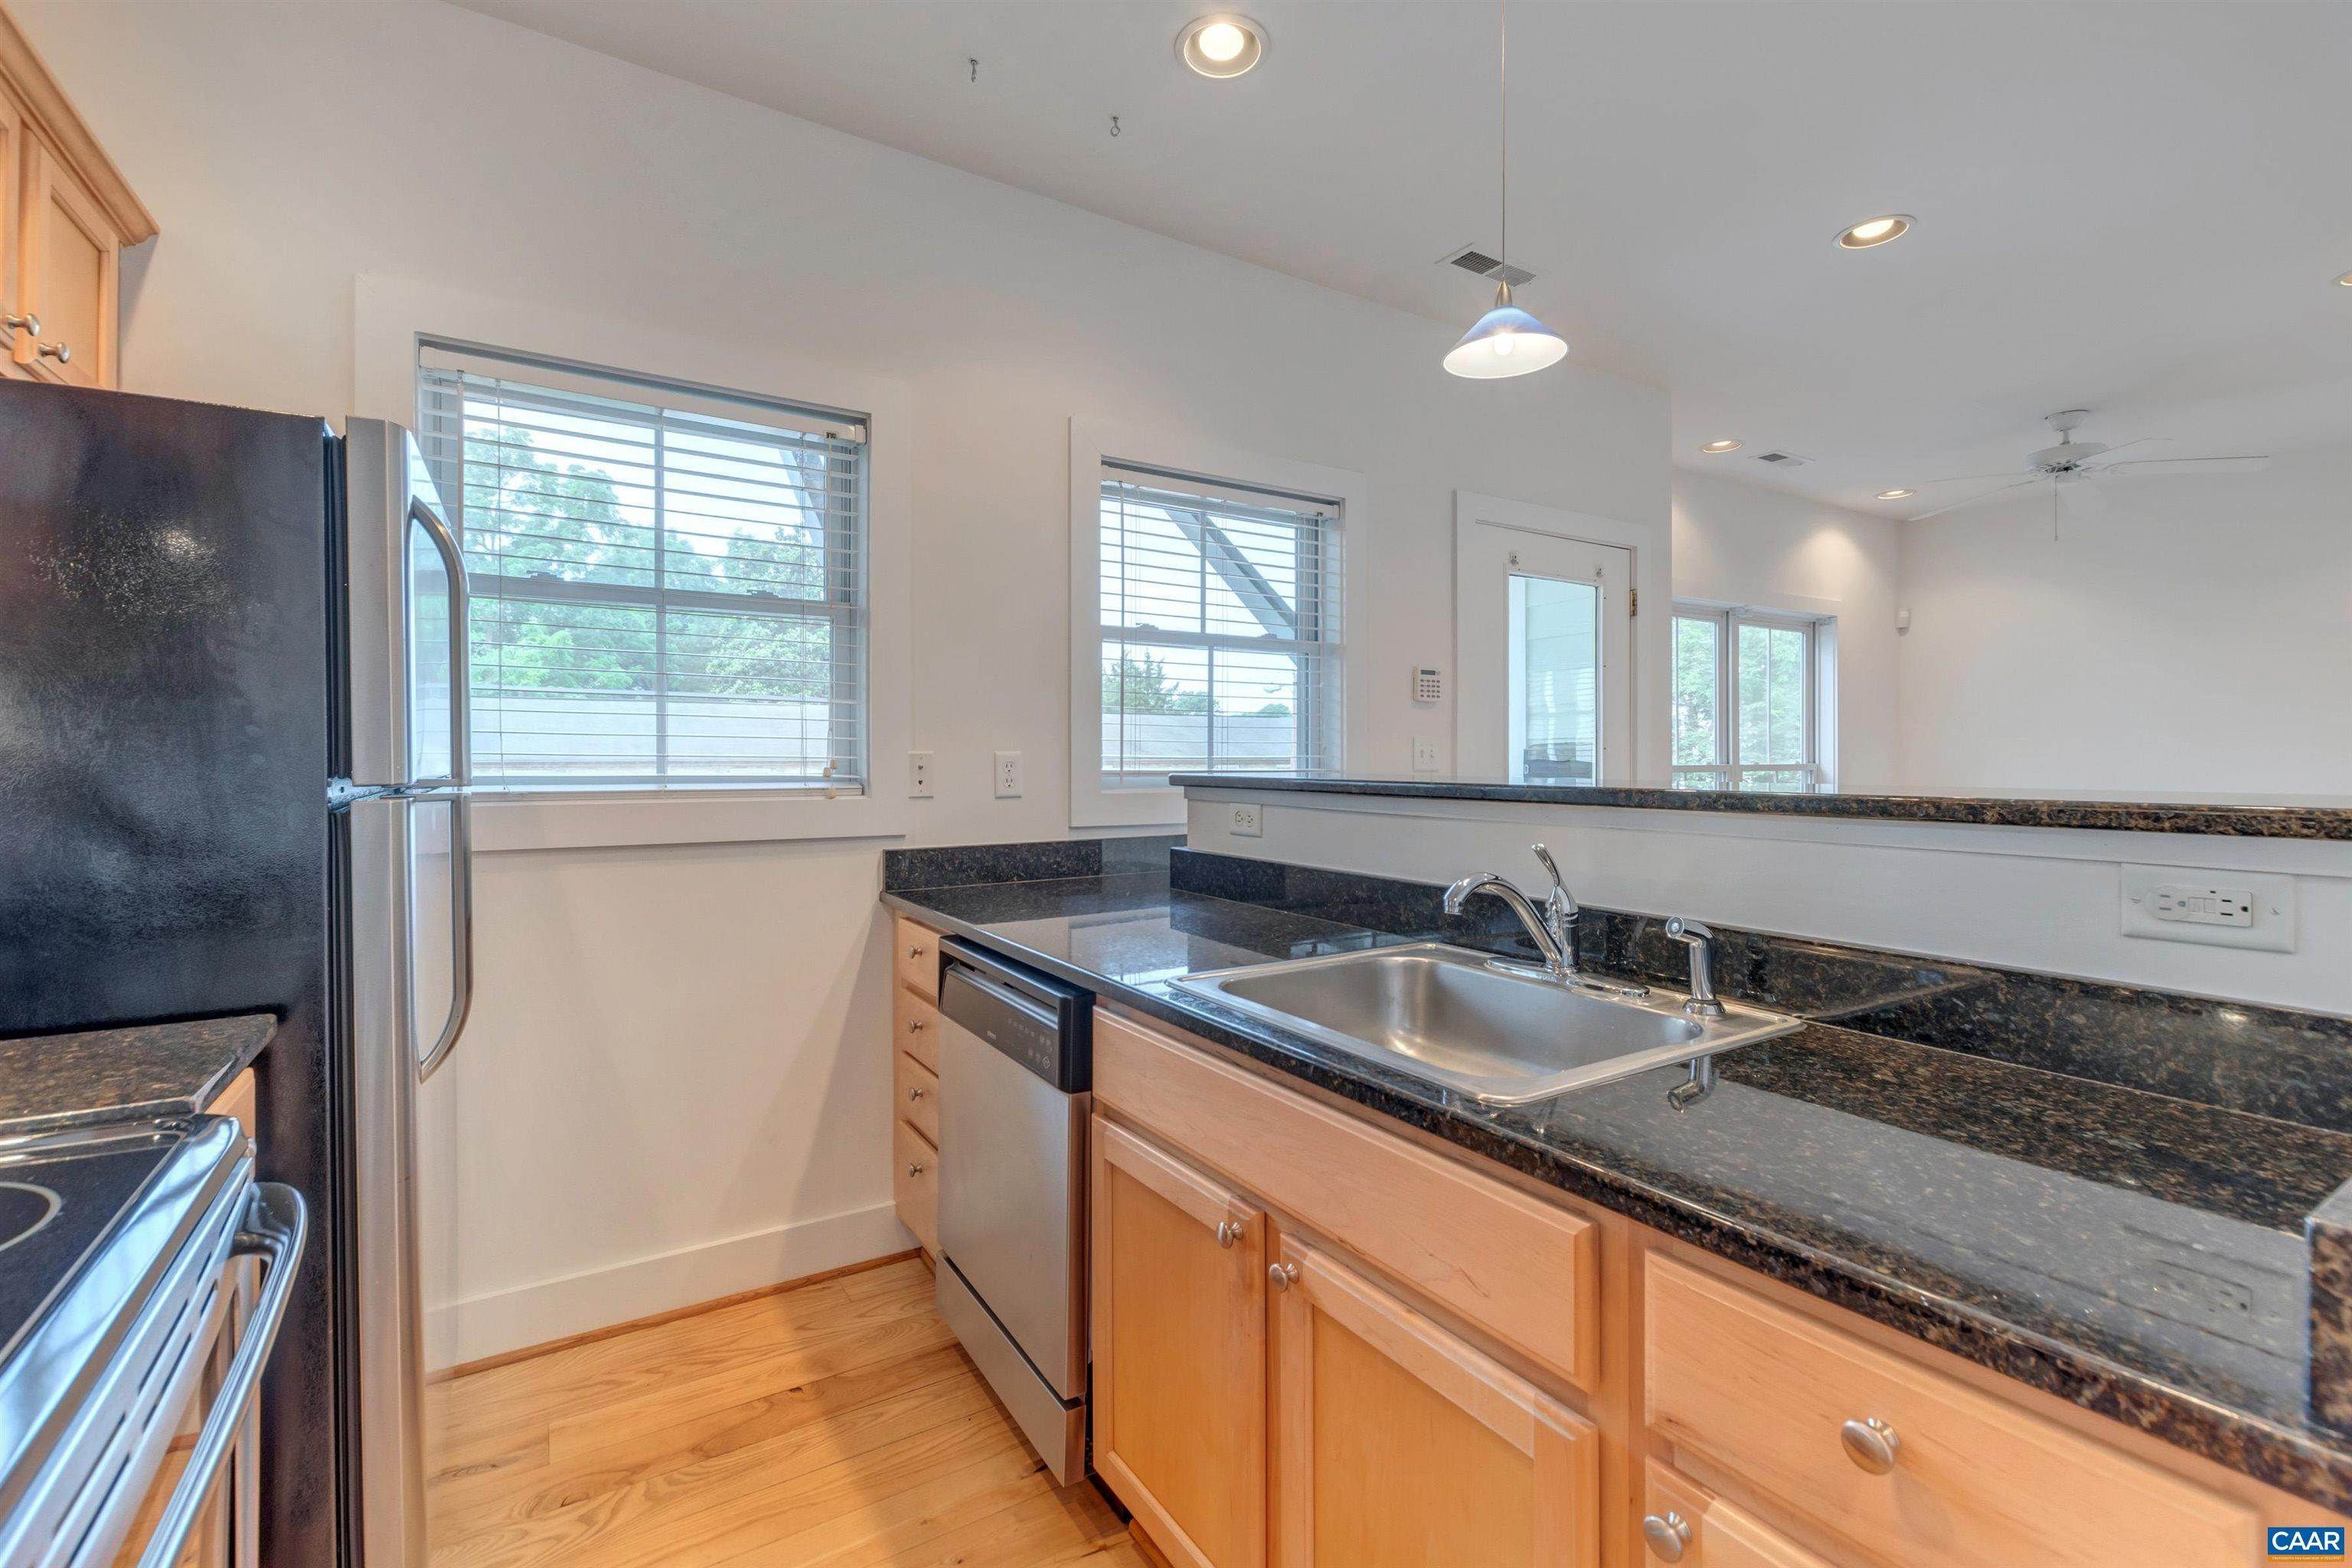 20. Condominiums for Sale at 206 5TH ST #D Charlottesville, Virginia 22903 United States